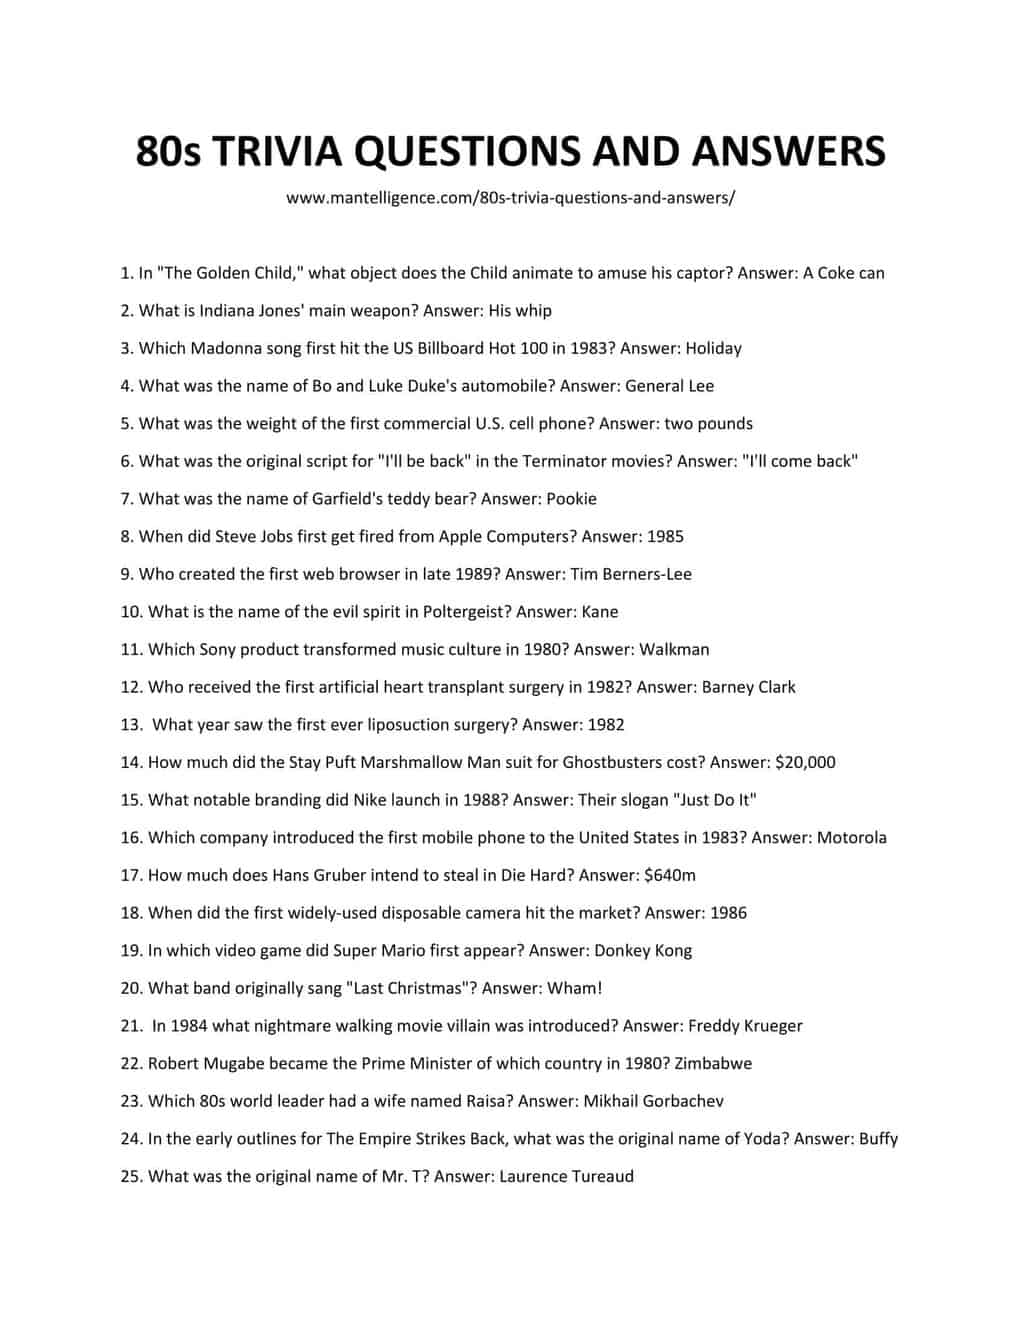 Downloadable list of 80s Trivia questions and answers